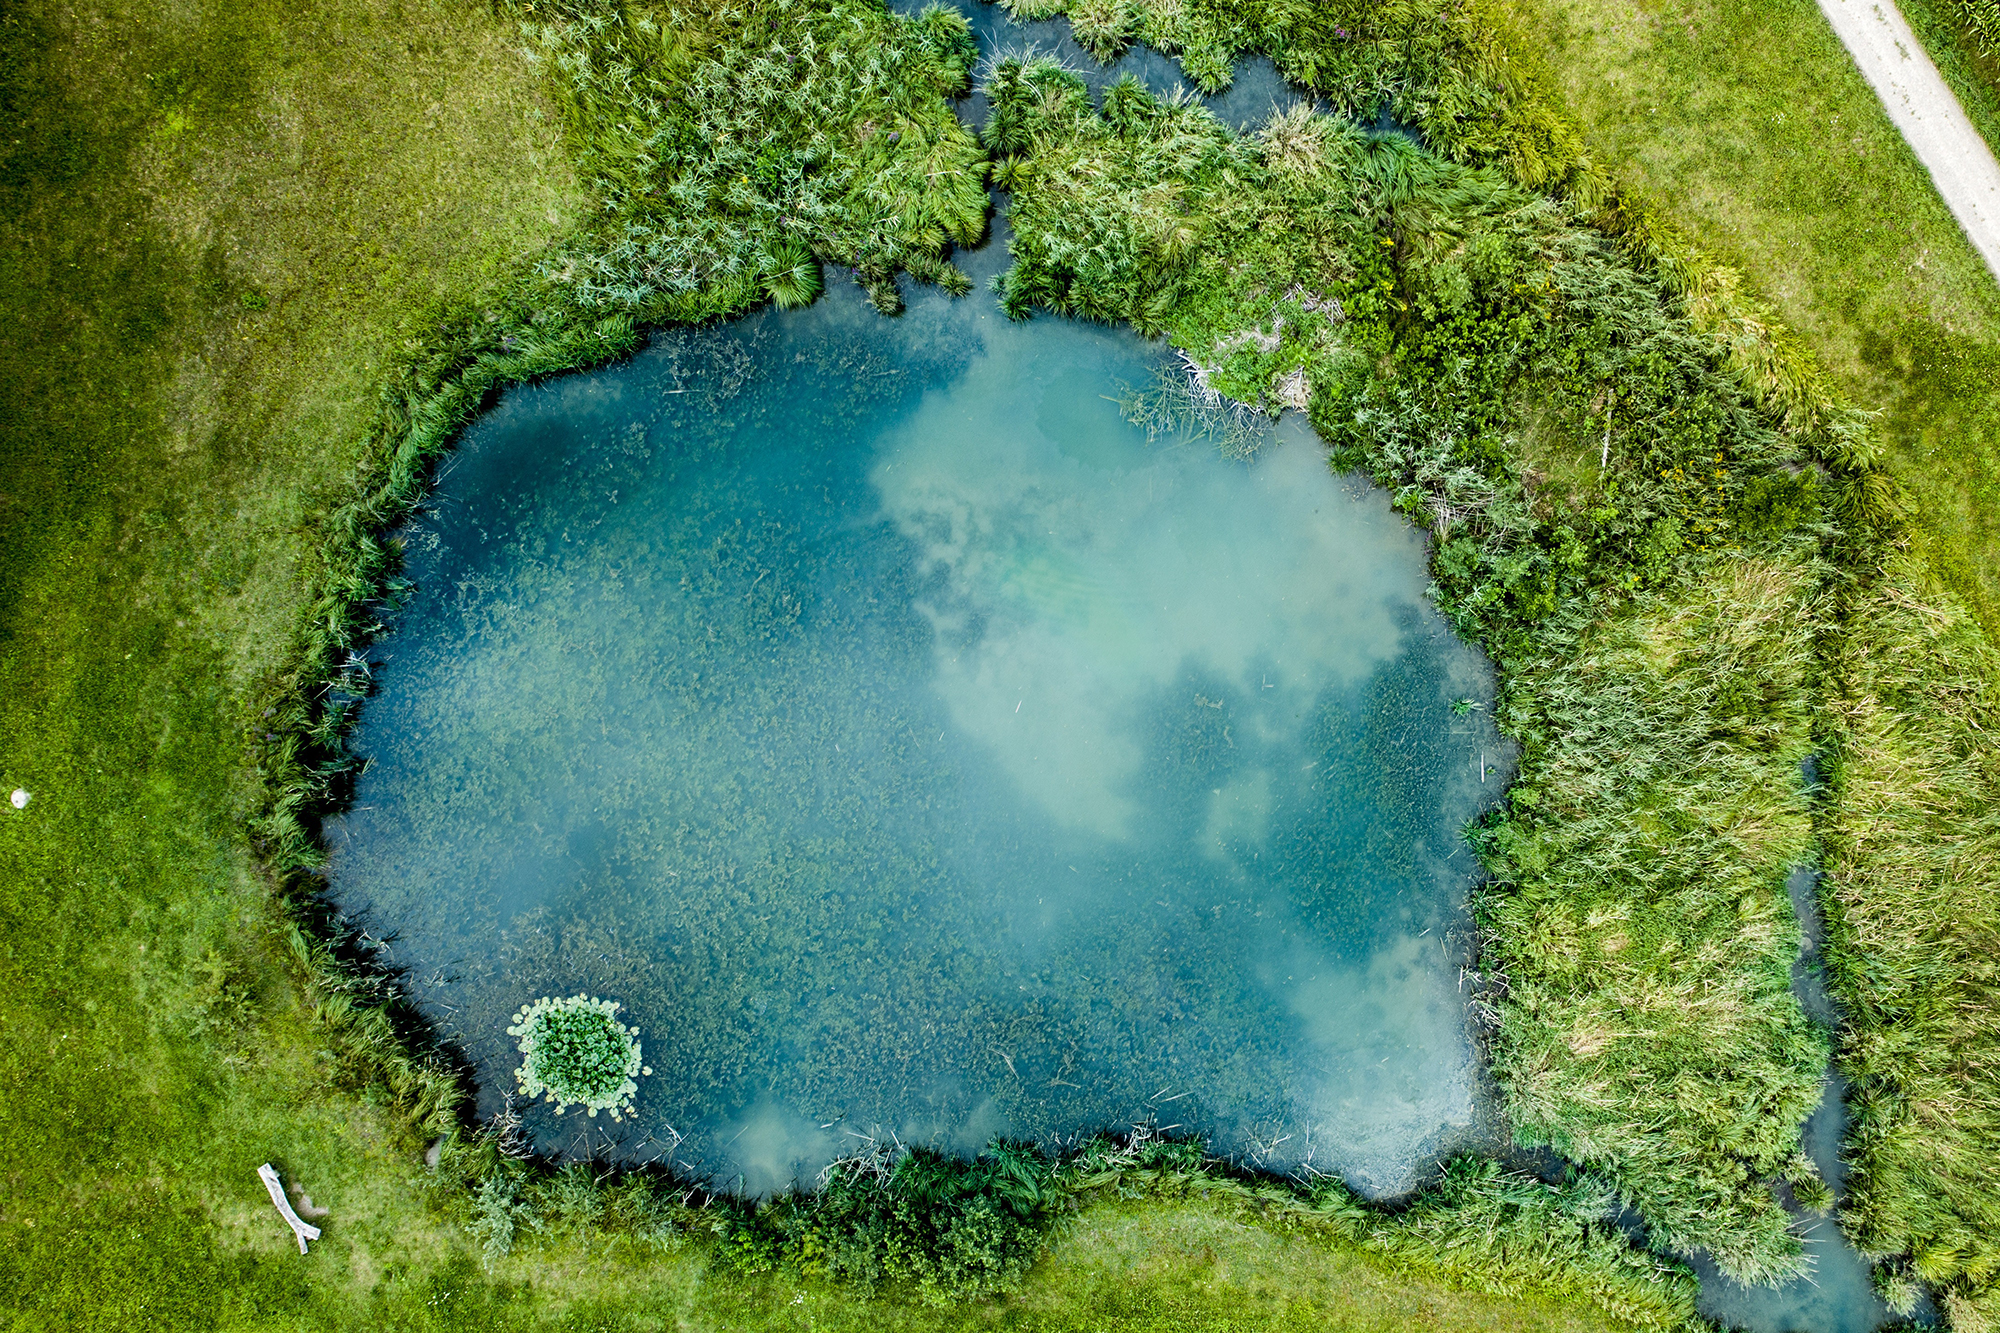 Why Scientists Are Rallying to Save Ponds